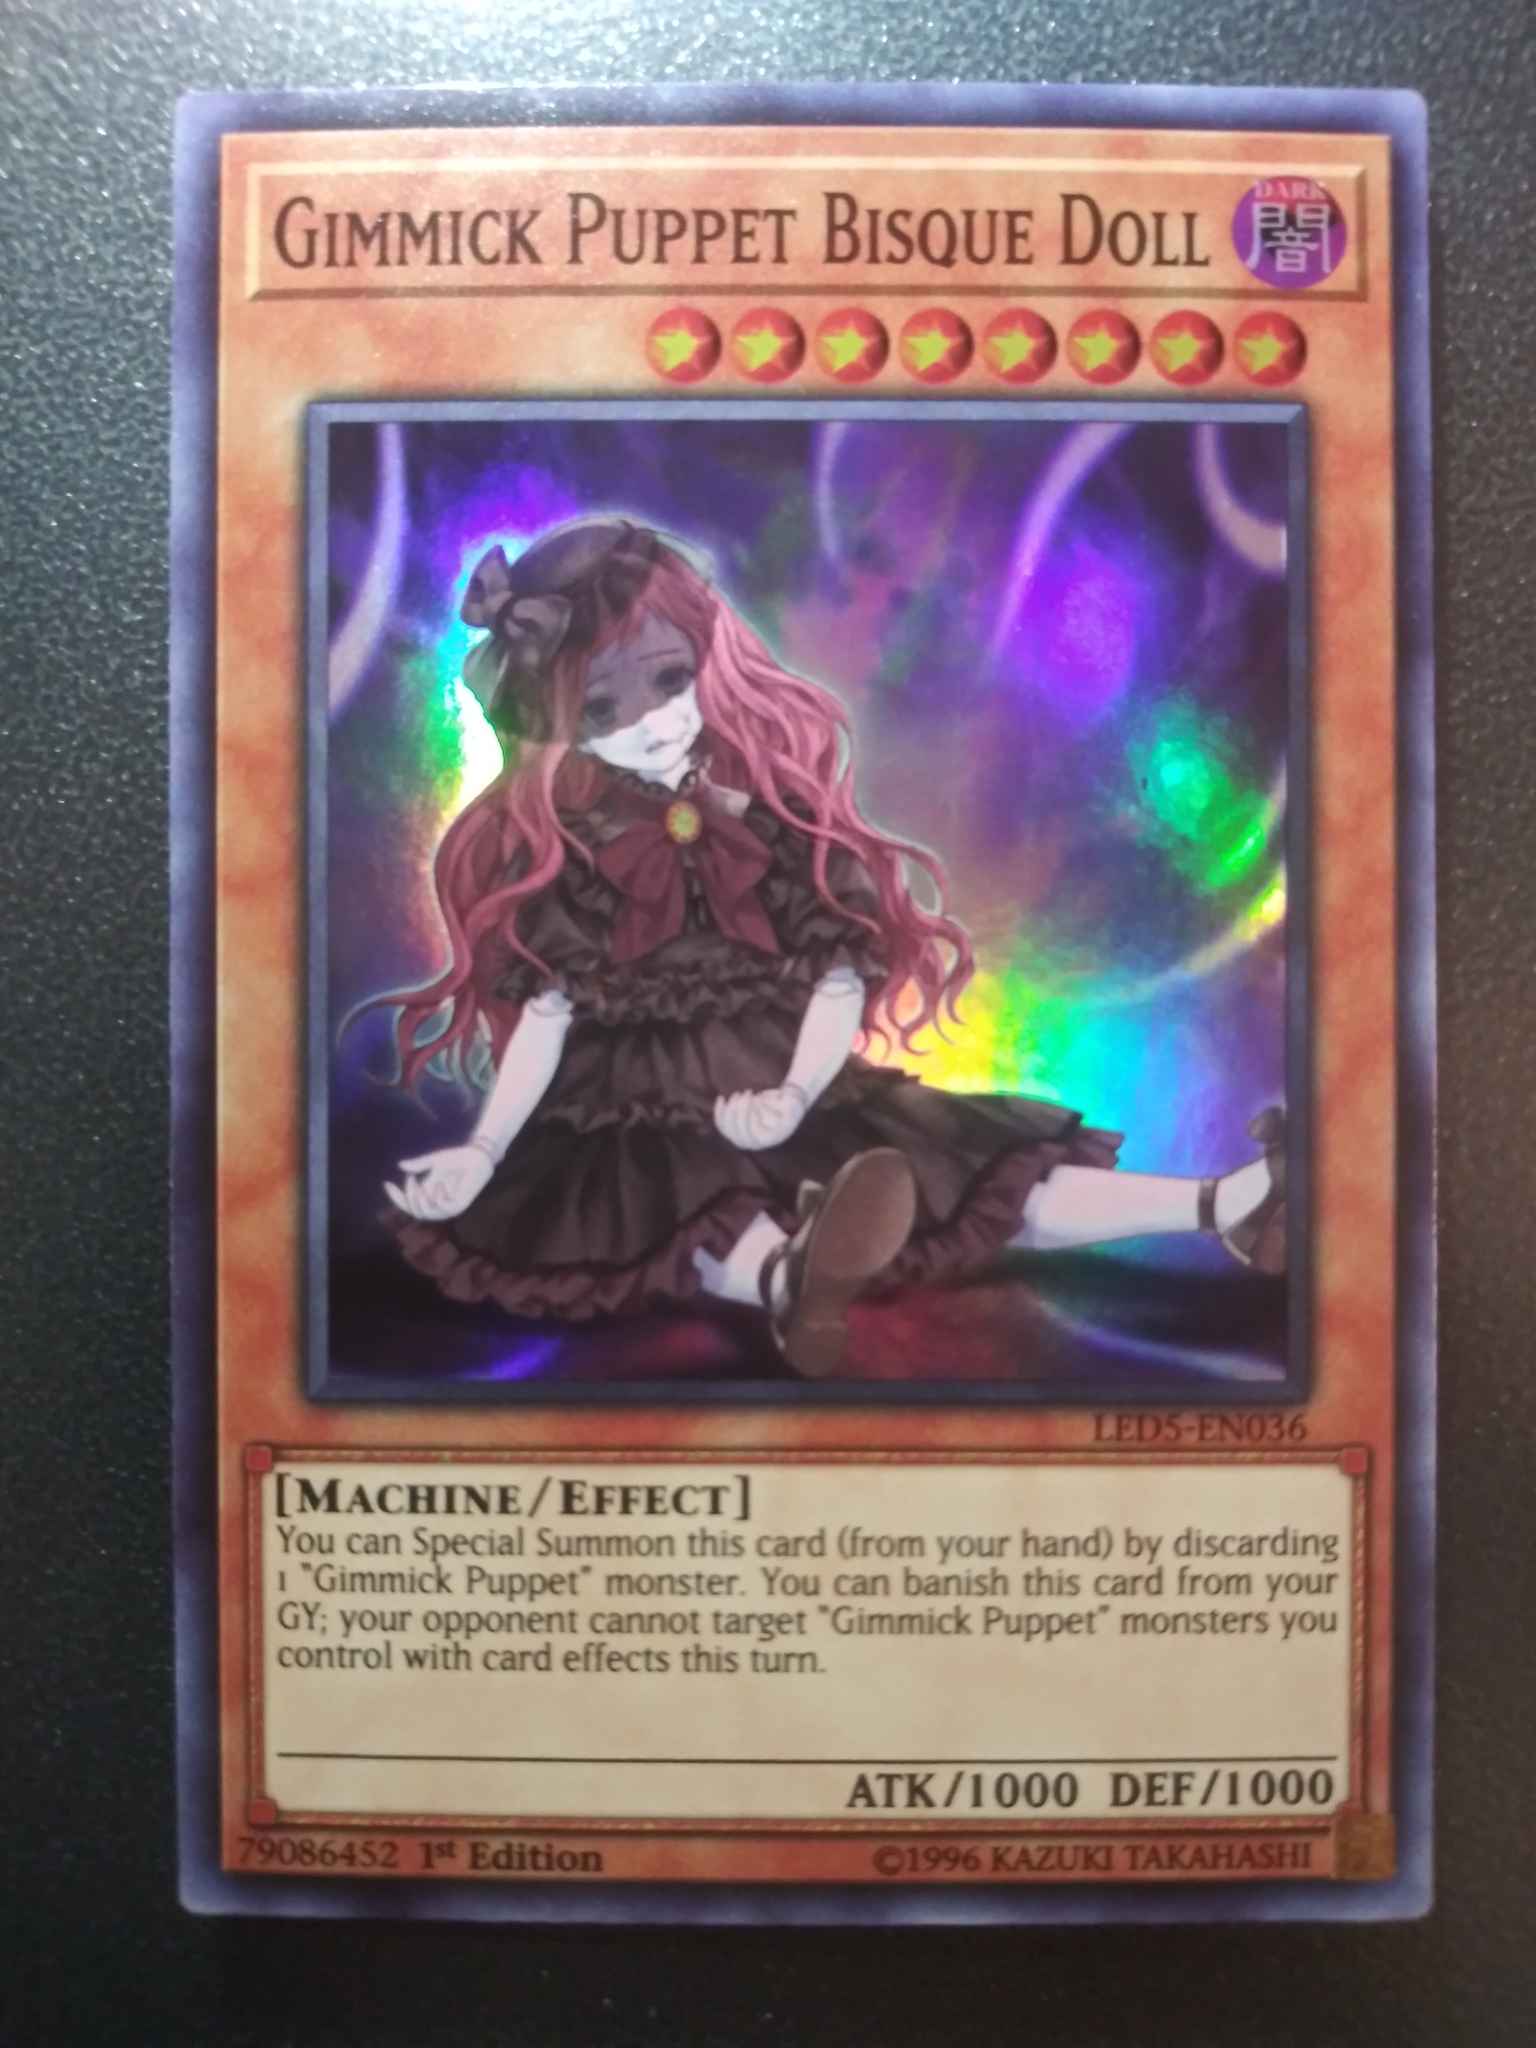 LED5-EN036 Gimmick Puppet Bisque Doll1st EditionSuper Rare Card YuGiOh TCG 